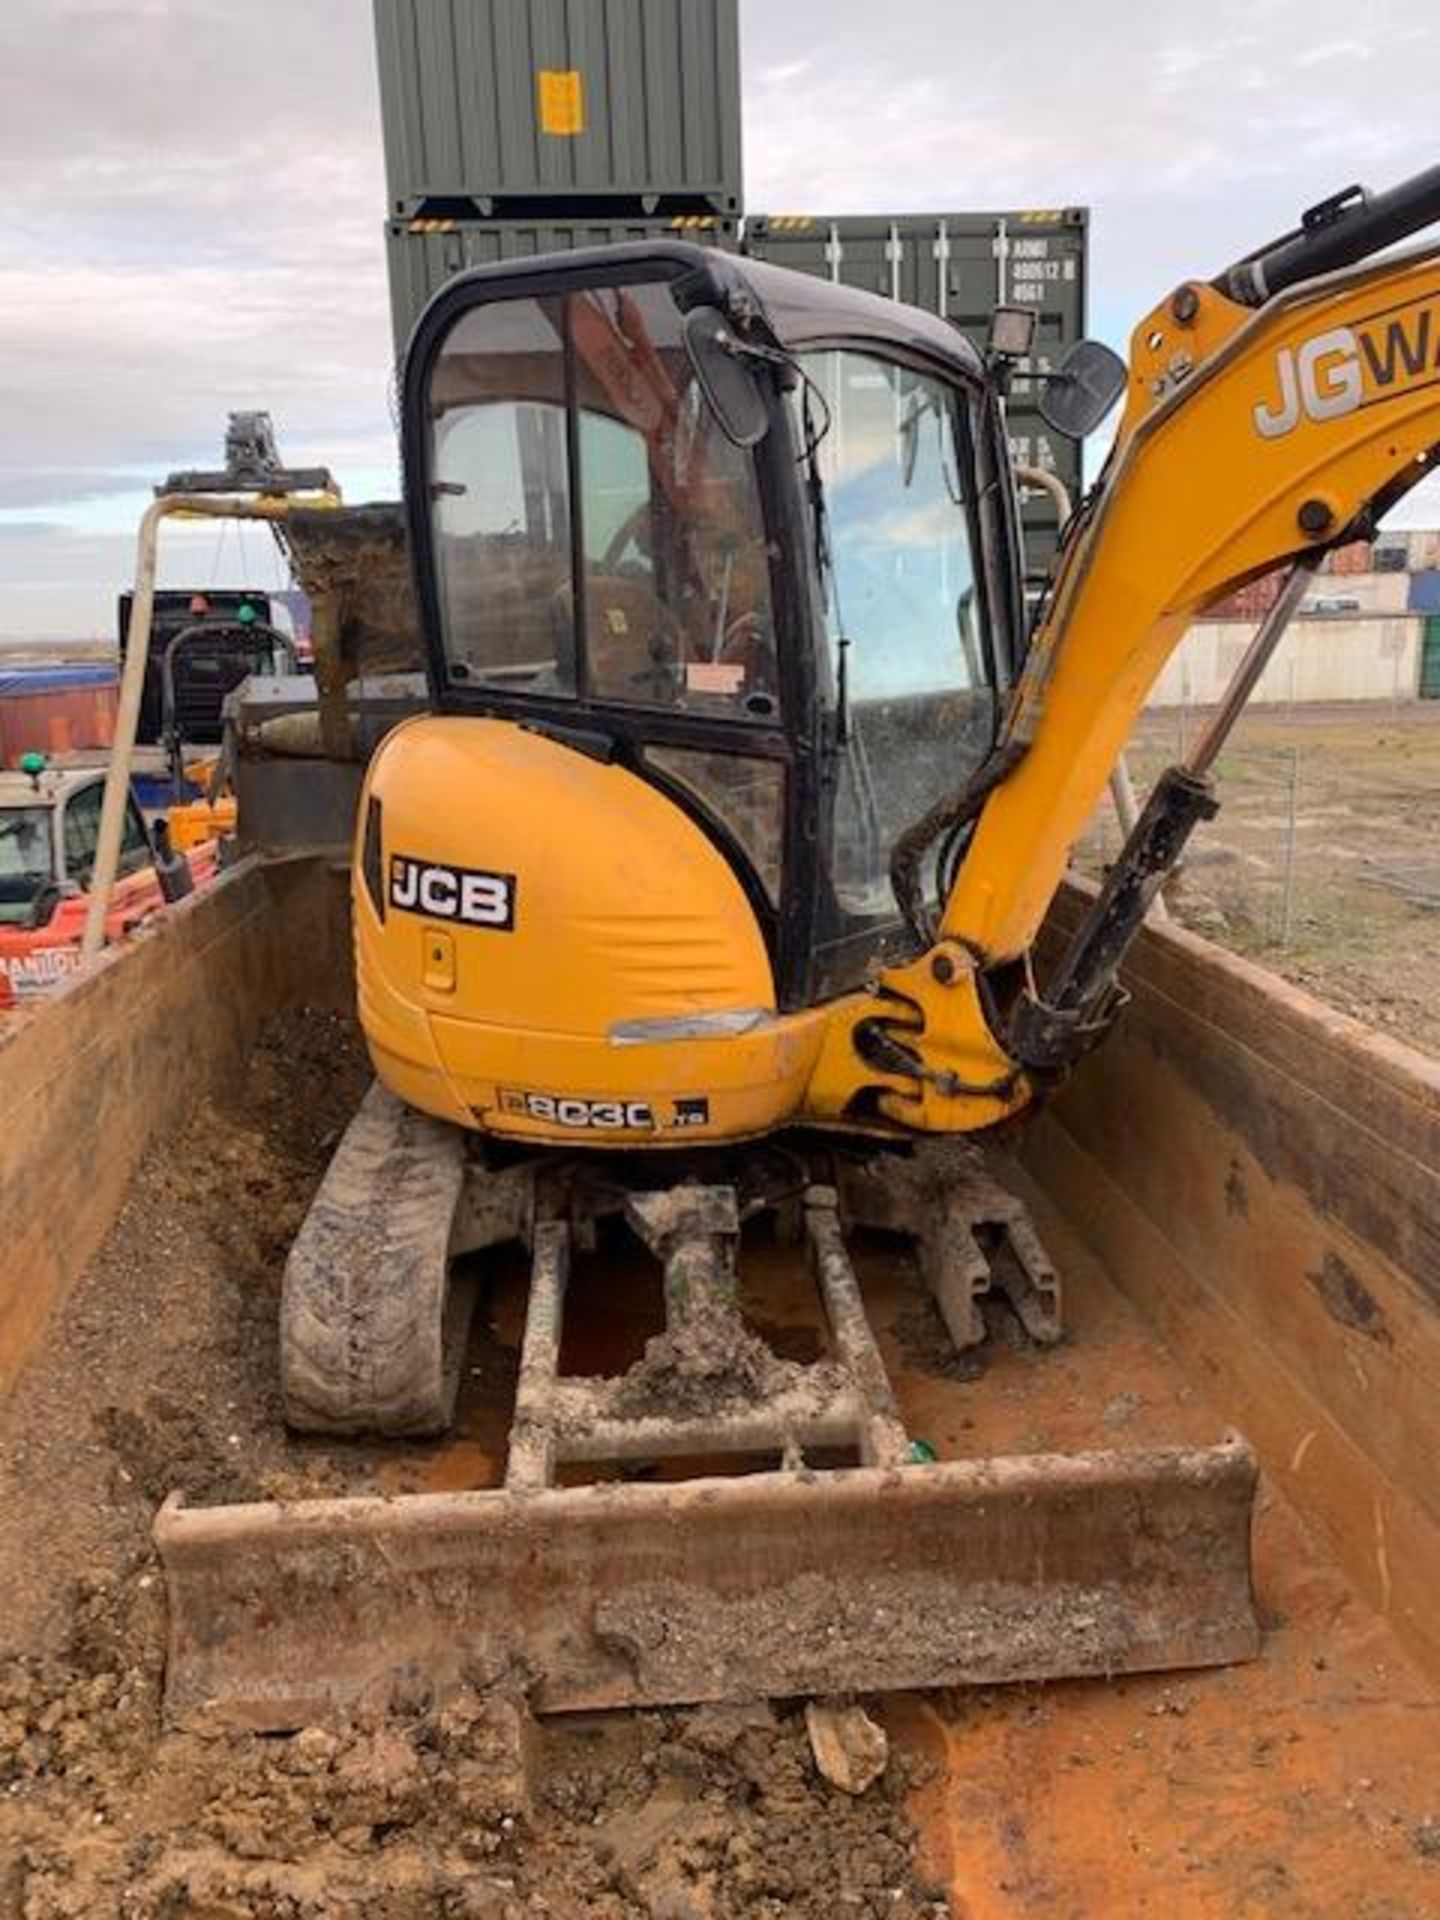 JCB 3 tonne tracked excavatorSerial No. JCB08030E02021469 (2012)TBC recorded hourspiped for